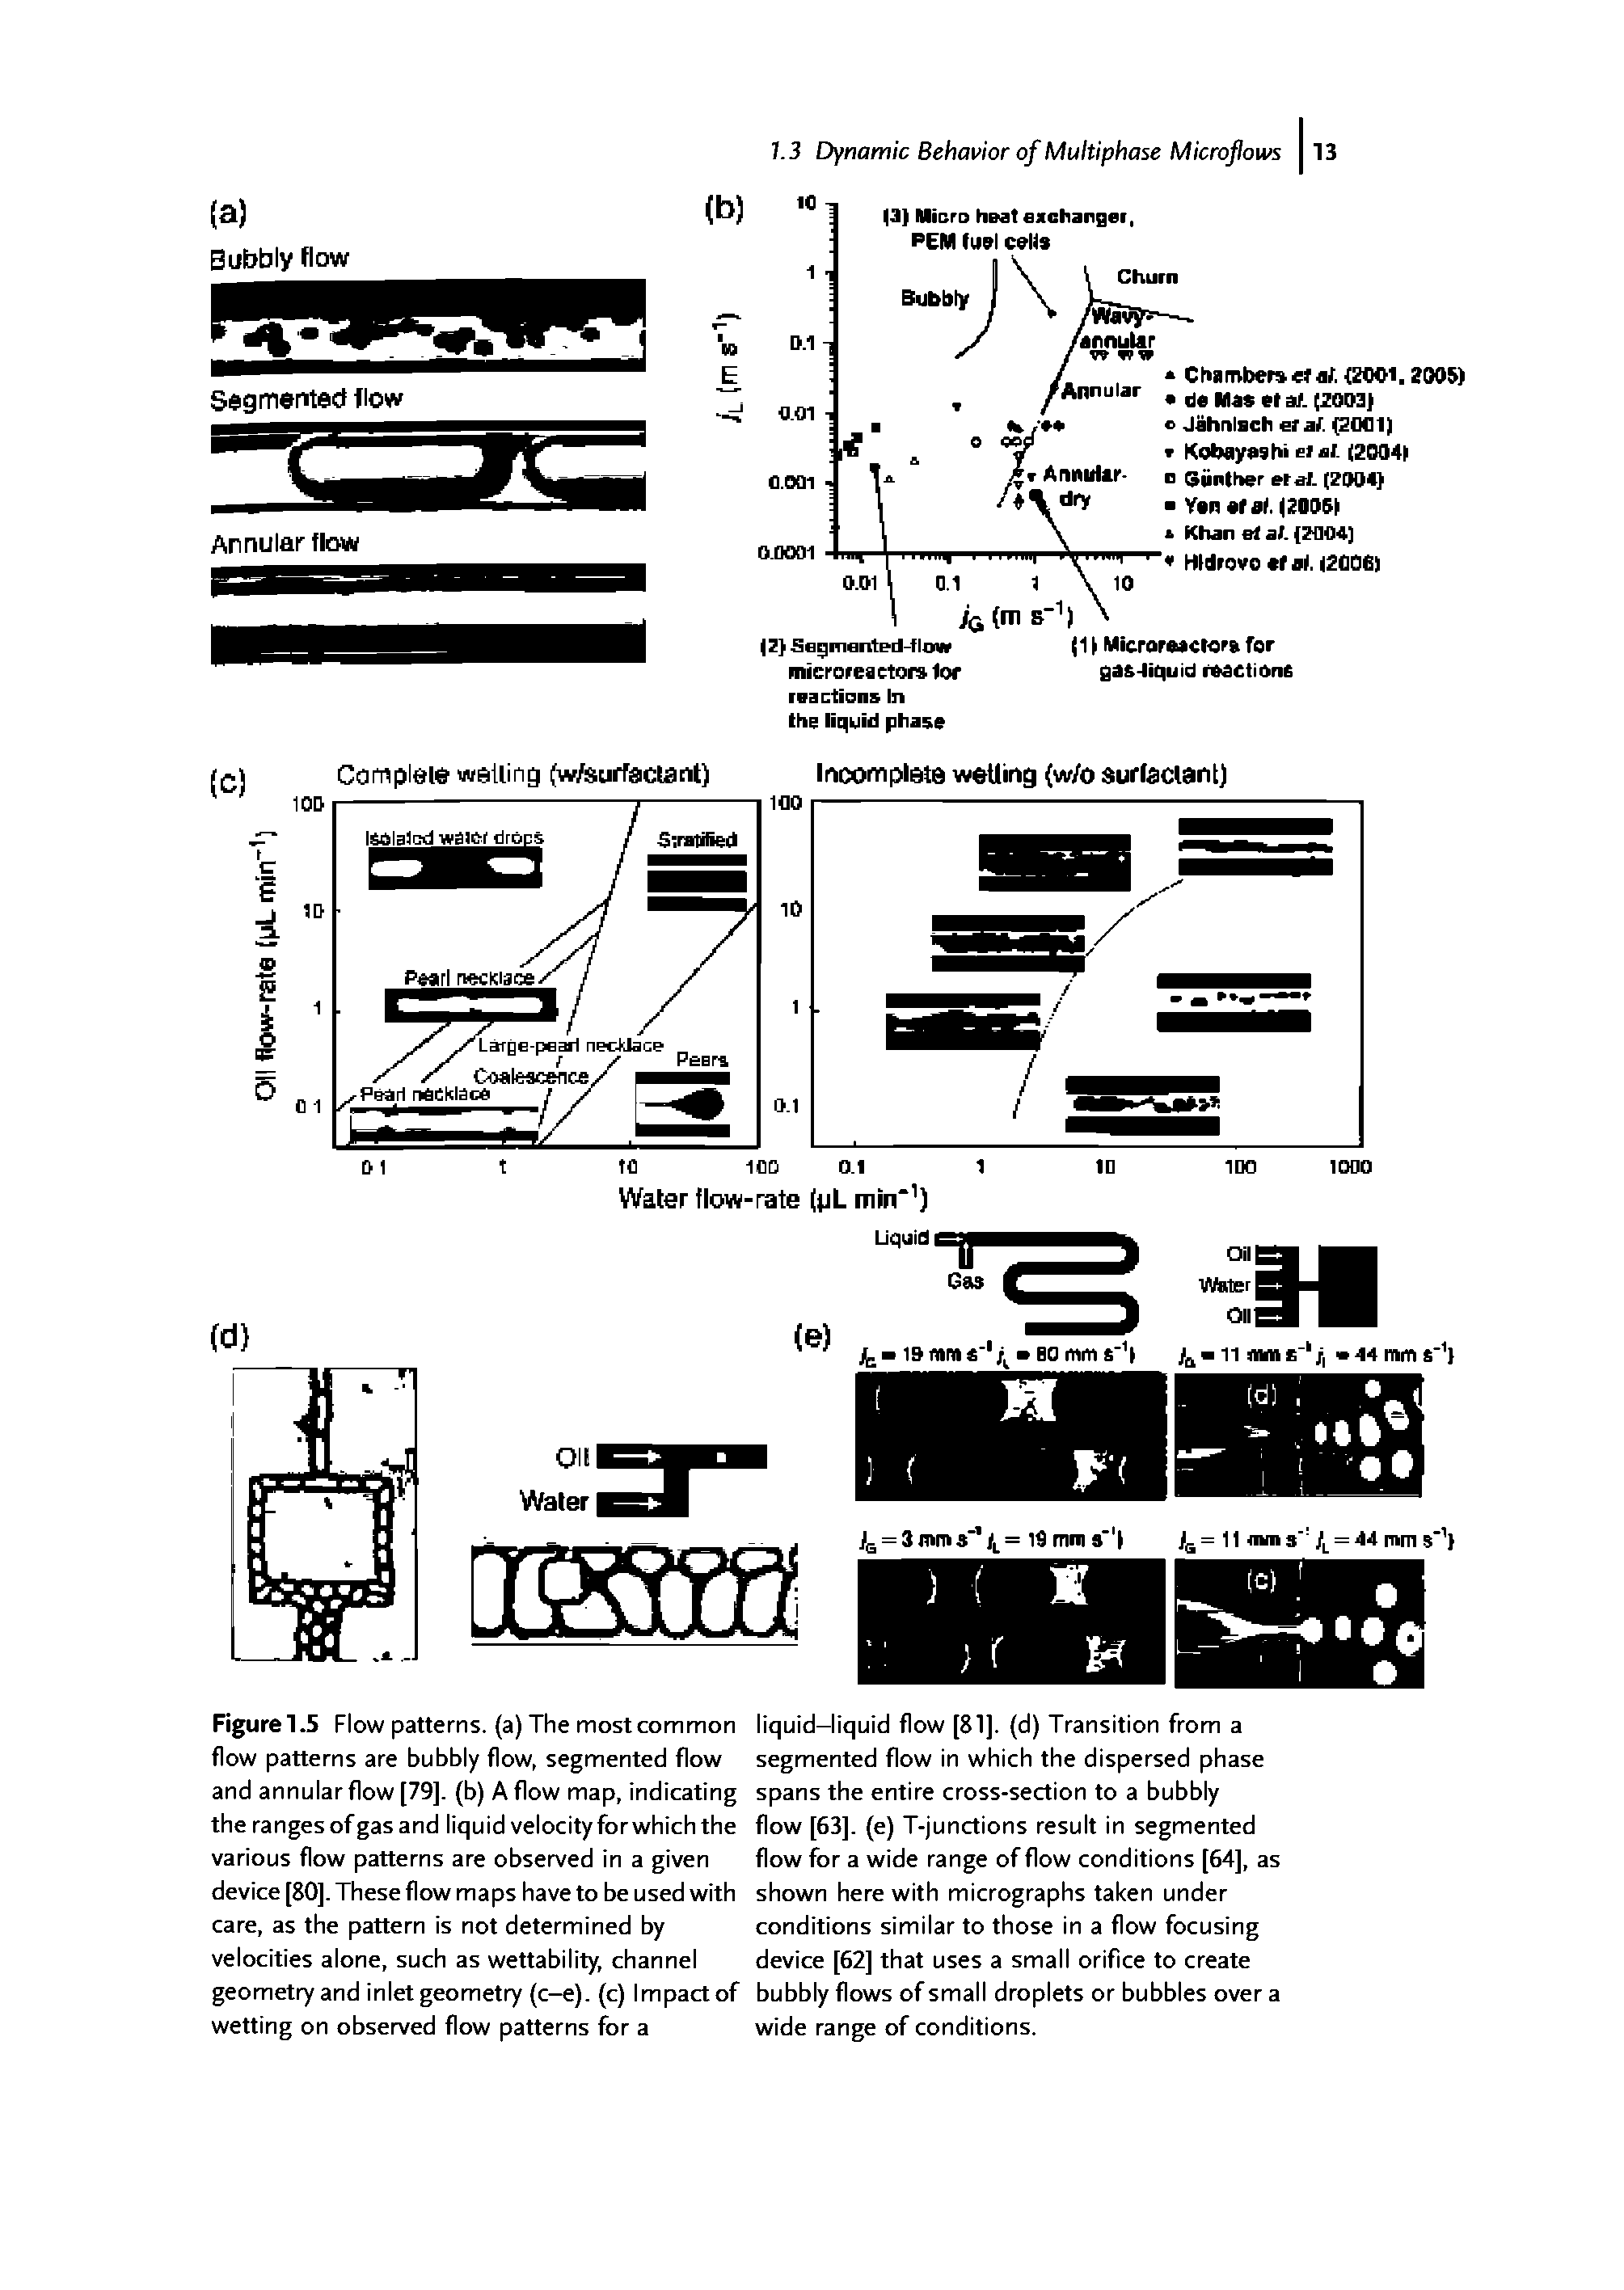 Figure1.5 Flow patterns, (a) The most common flow patterns are bubbly flow, segmented flow and annular flow [79], (b) A flow map, indicating the ranges of gas and liquid velocity for which the various flow patterns are observed in a given device [80], These flow maps have to be used with care, as the pattern is not determined by velocities alone, such as wettability, channel geometry and inlet geometry (c-e). (c) Impact of wetting on observed flow patterns for a...